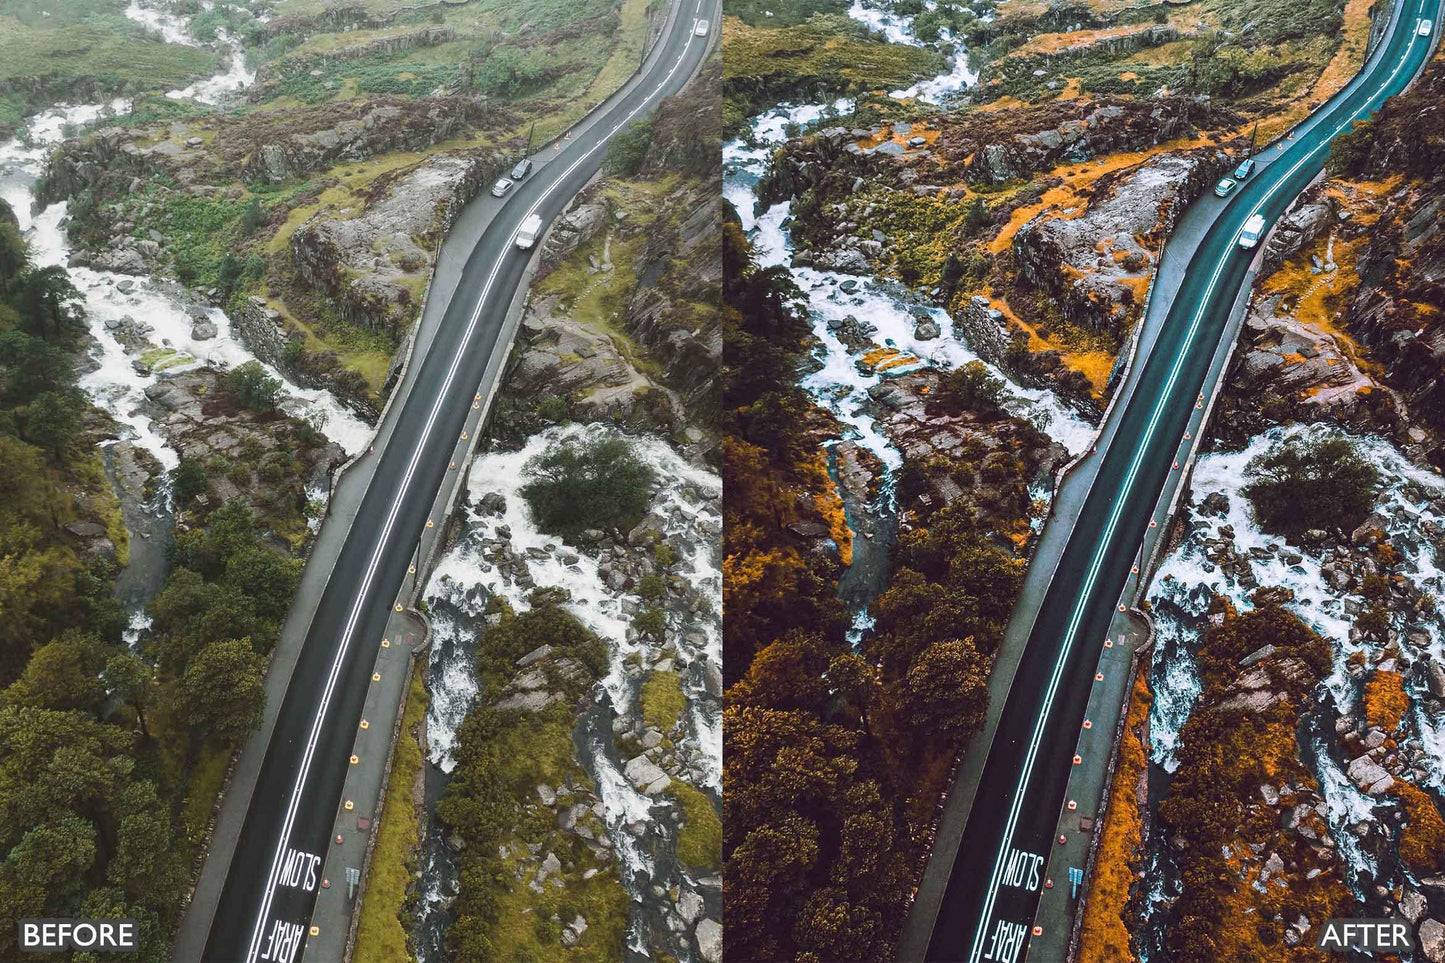 Lightroom Presets for Aerial & Drone Photography - adobe lightroom presets, Cinematic Presets, Drone presets, instagram presets, landscape presets, lightroom presets, presets before and after, professional lightroom presets - aaapresets.com